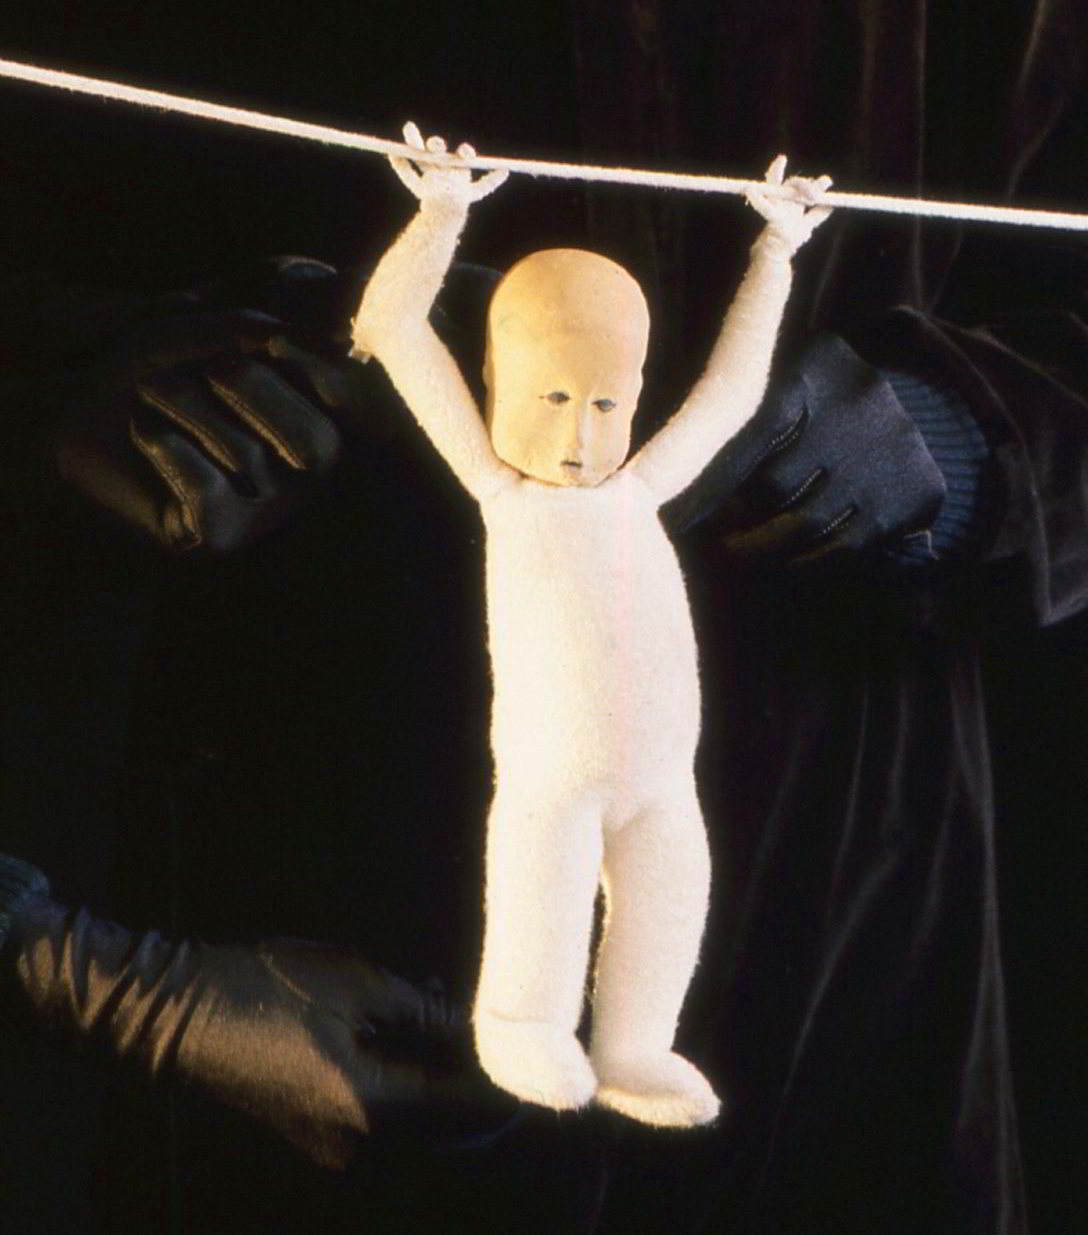 Handspan Theatre Moments a puppet figure hanging by arms swinging on a wire